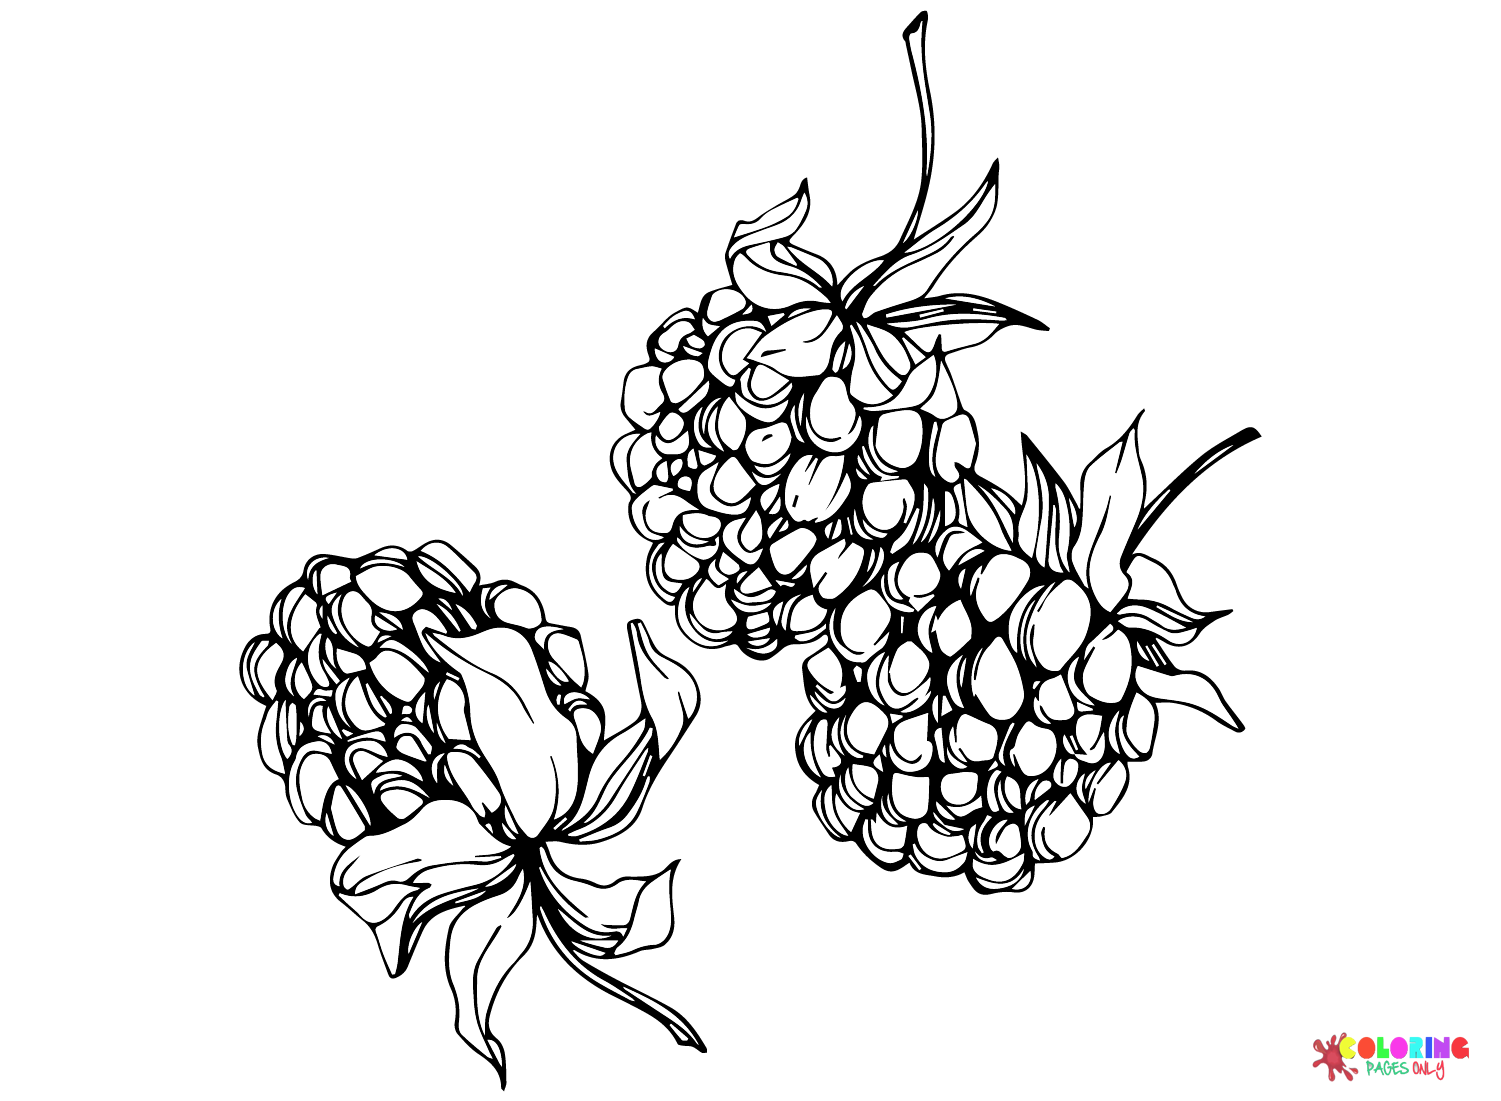 Blackberry Free Coloring Page